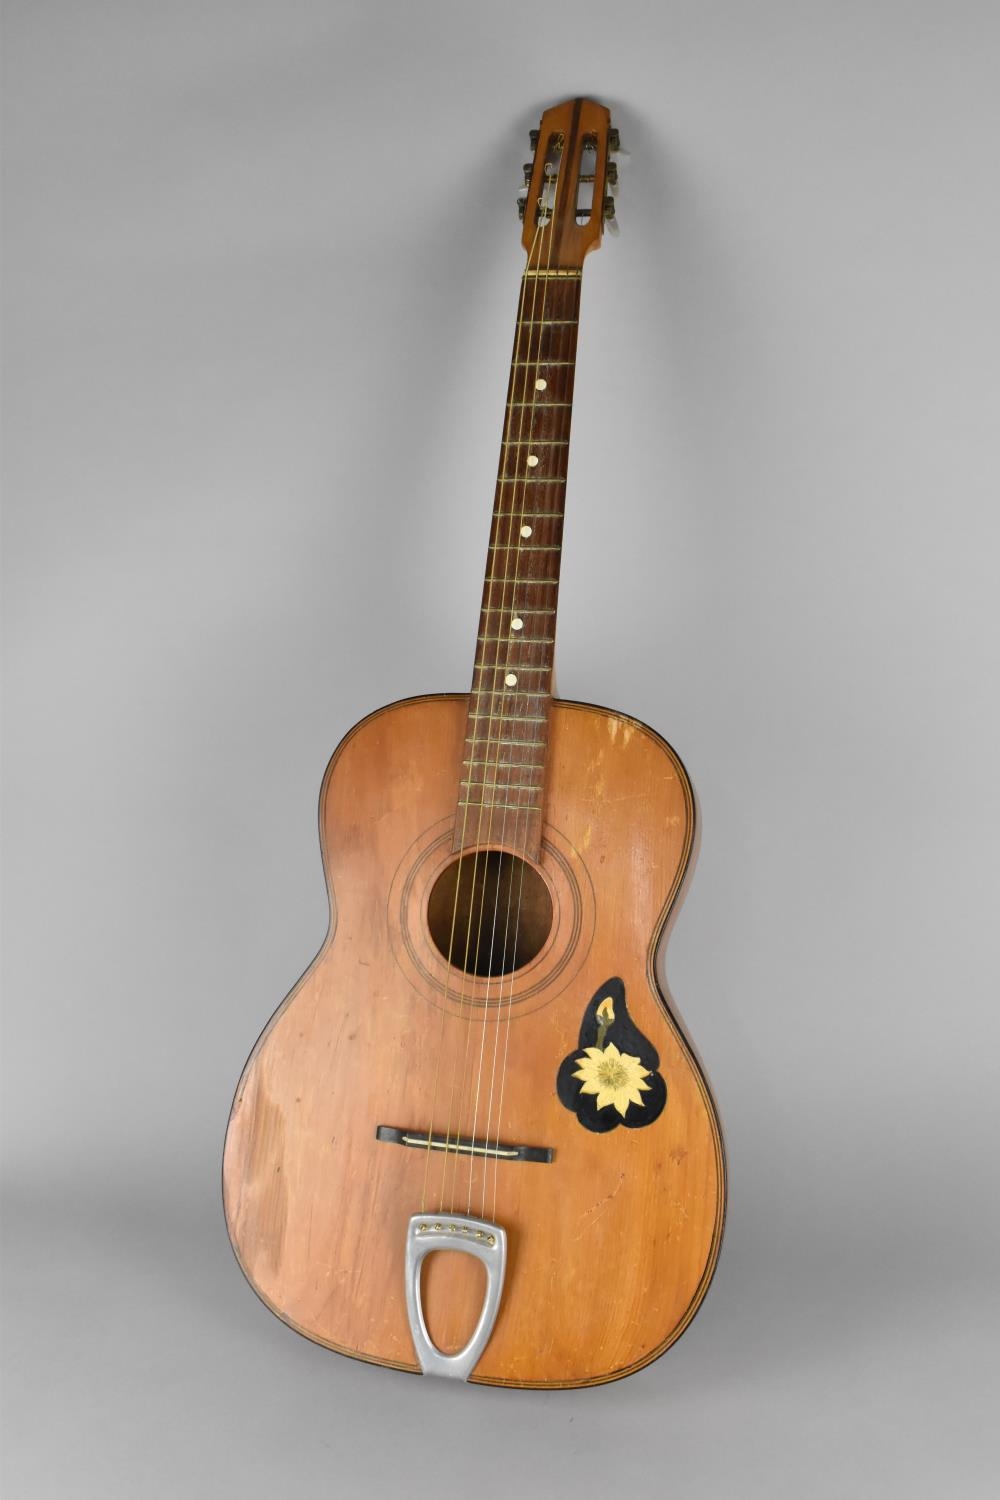 A Vintage Guitar with Label Sticker for Nani, Malta